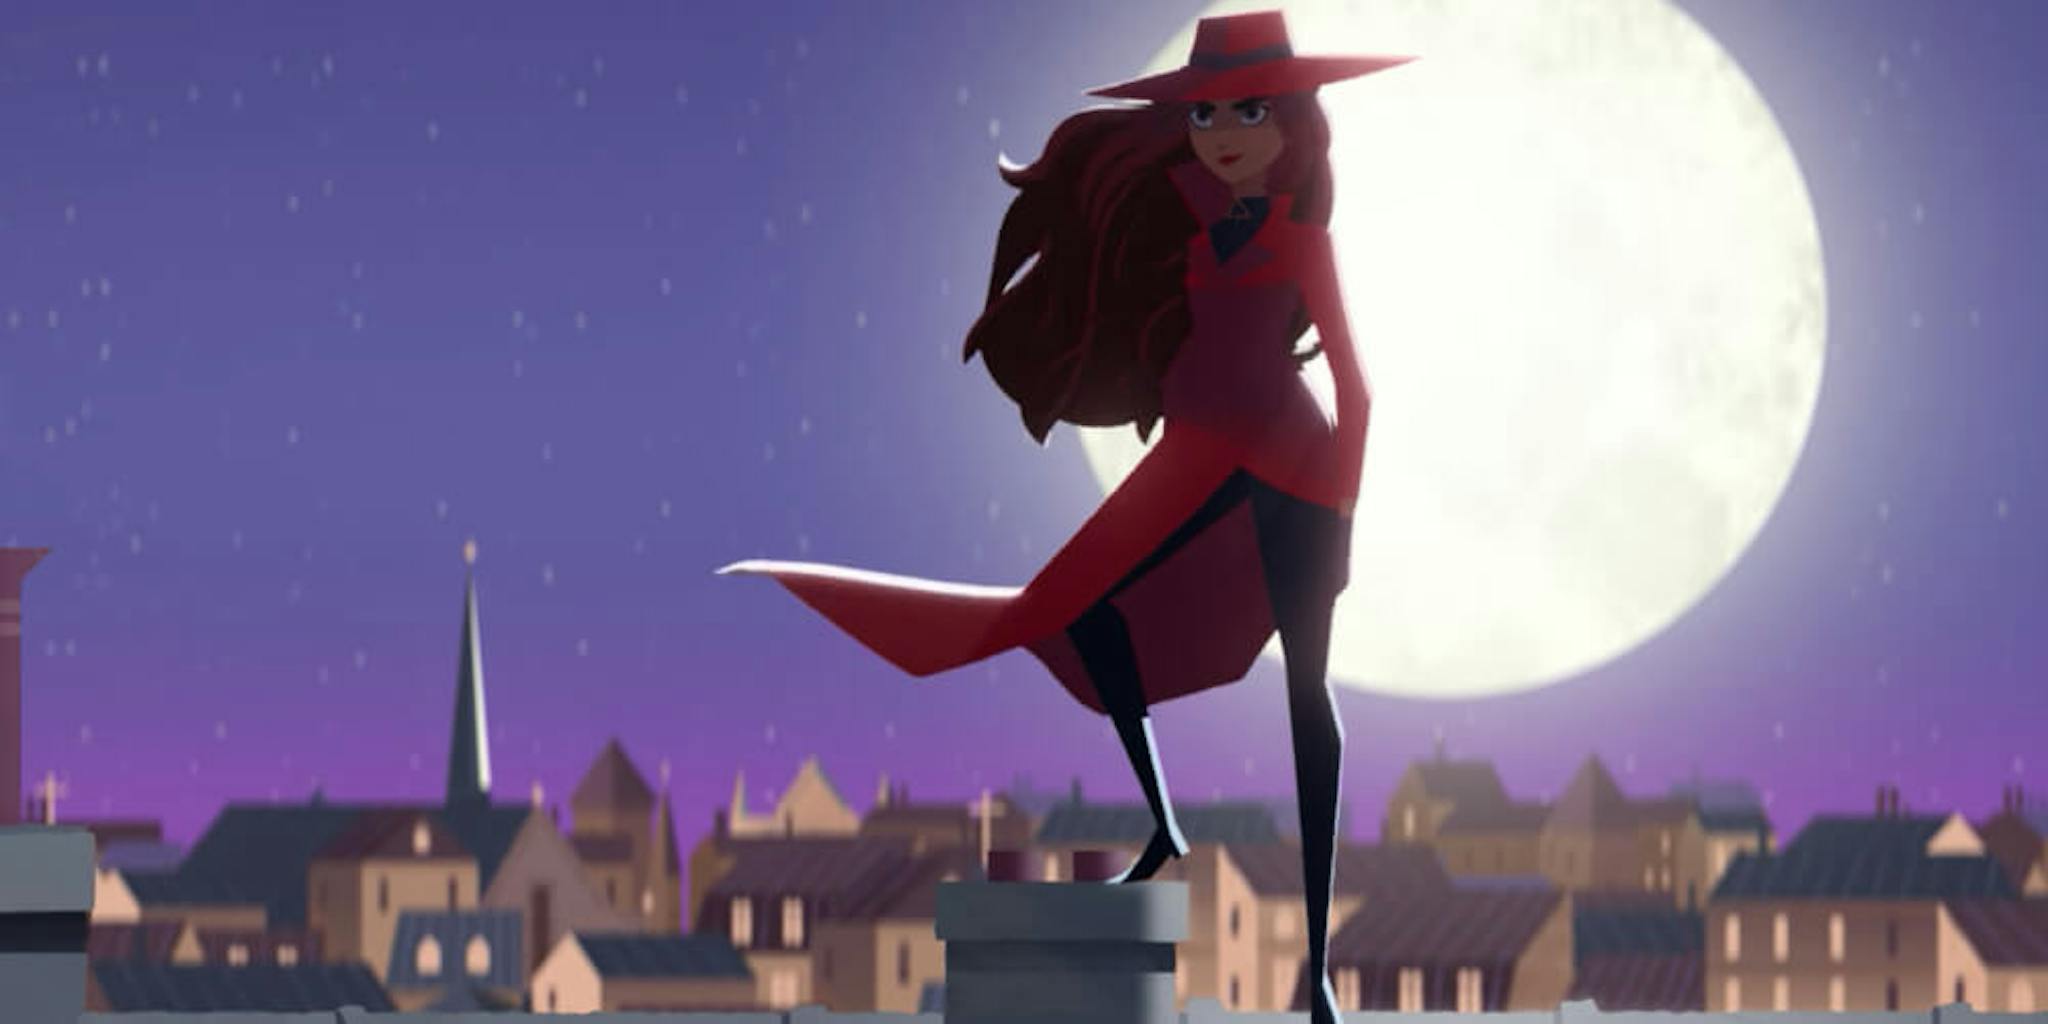 Animator For Netflixs Carmen Sandiego Fired After Asking For Fair Pay 2969